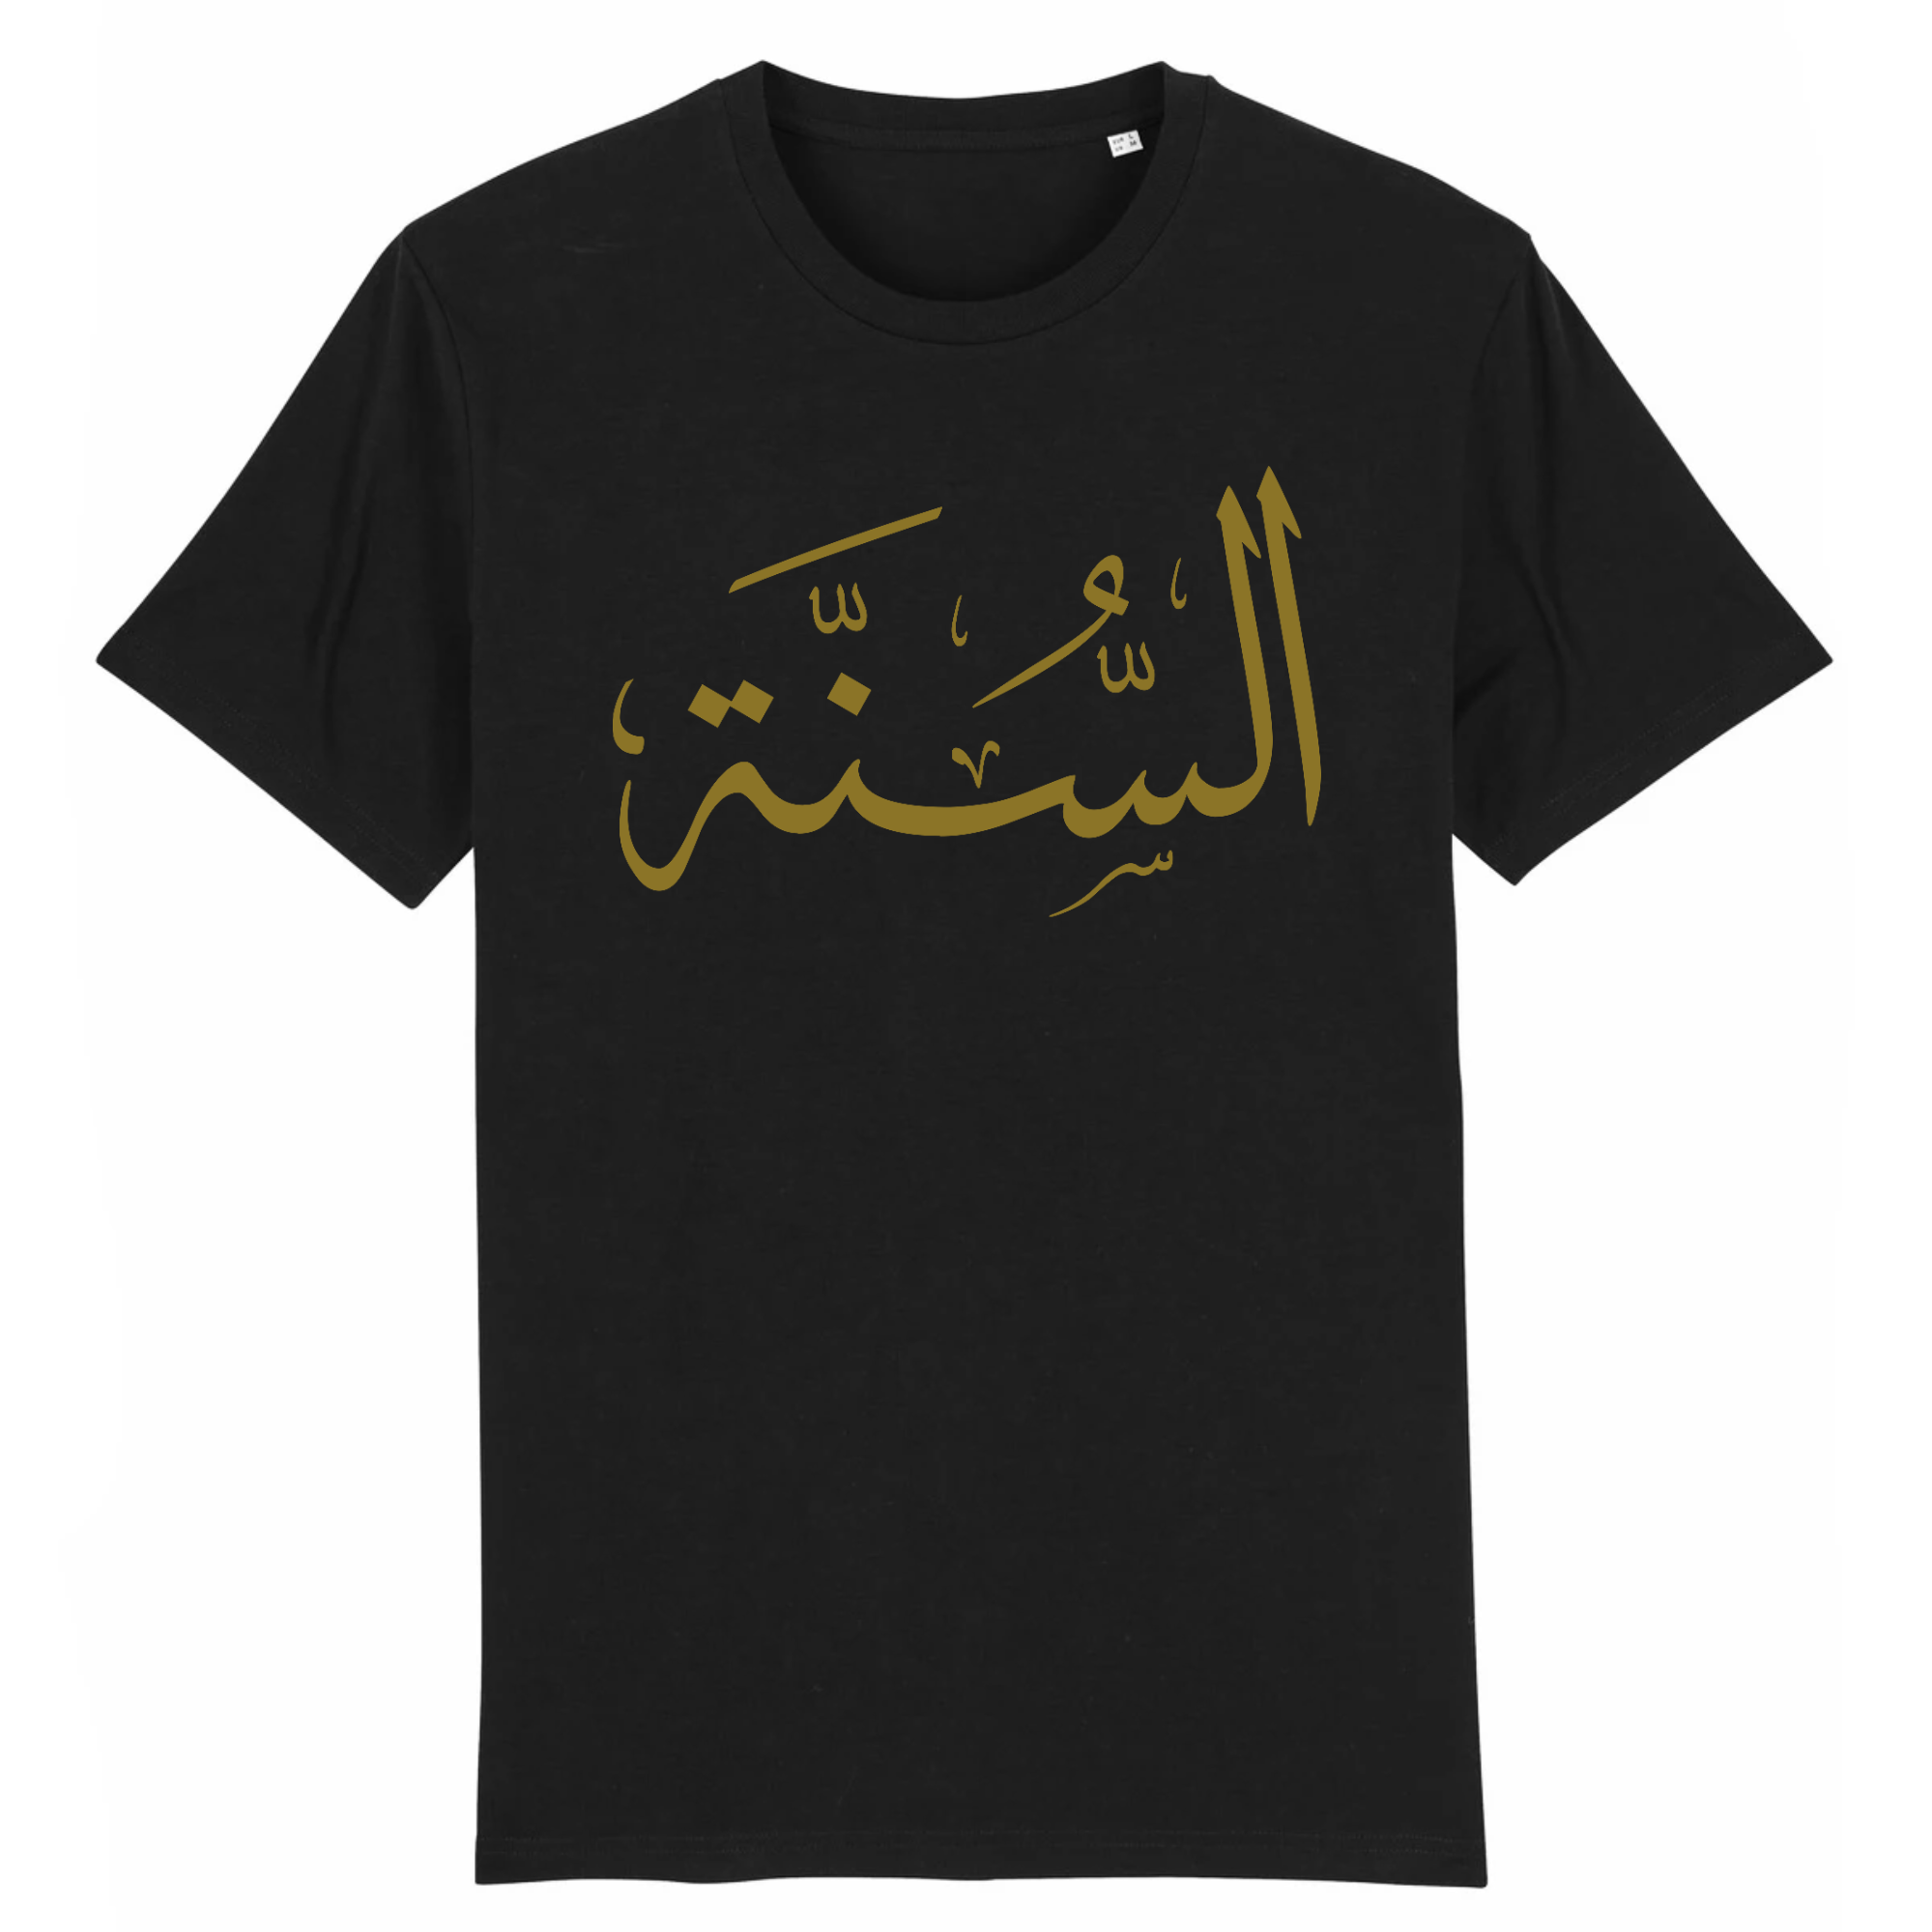 As-Sunna - Or - T-shirt Calligraphie Arabe